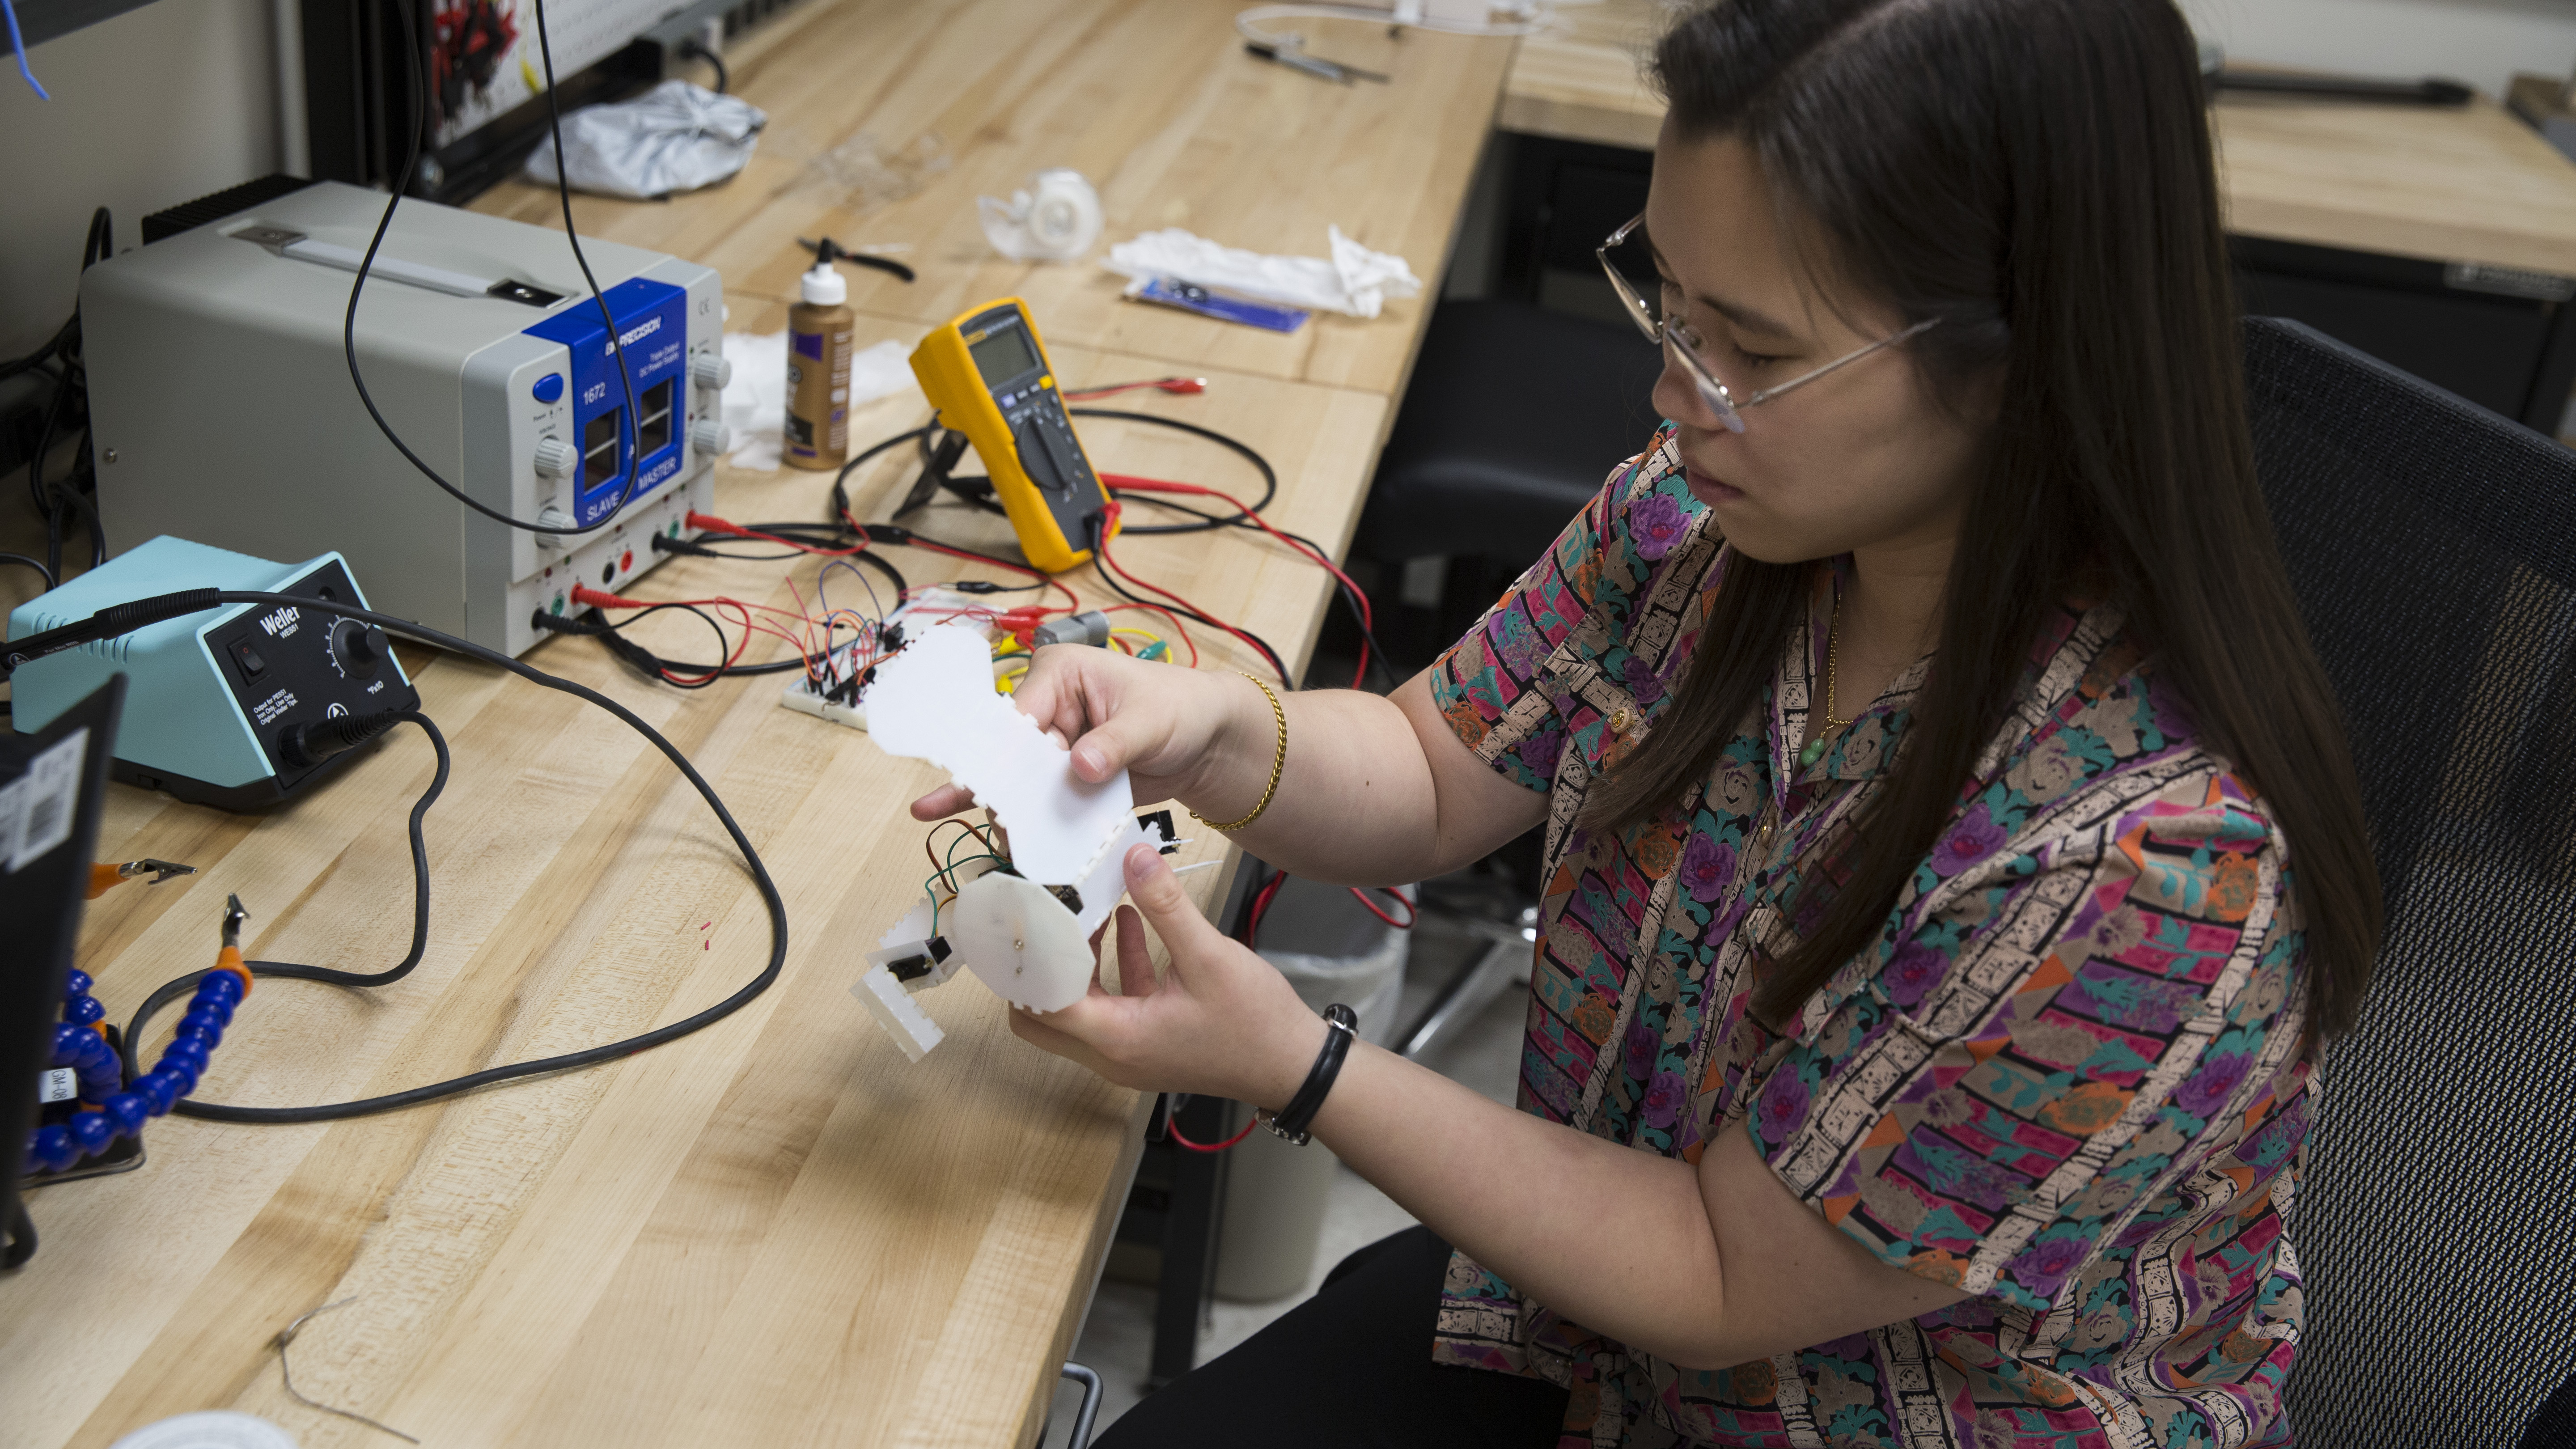 Sung is developing design software to enable people without an engineering background to create custom origami robots that can move on the ground. The tool, called Interactive Robogami, is based on a database of robot parts which users can combine together like a “virtual Lego set.”